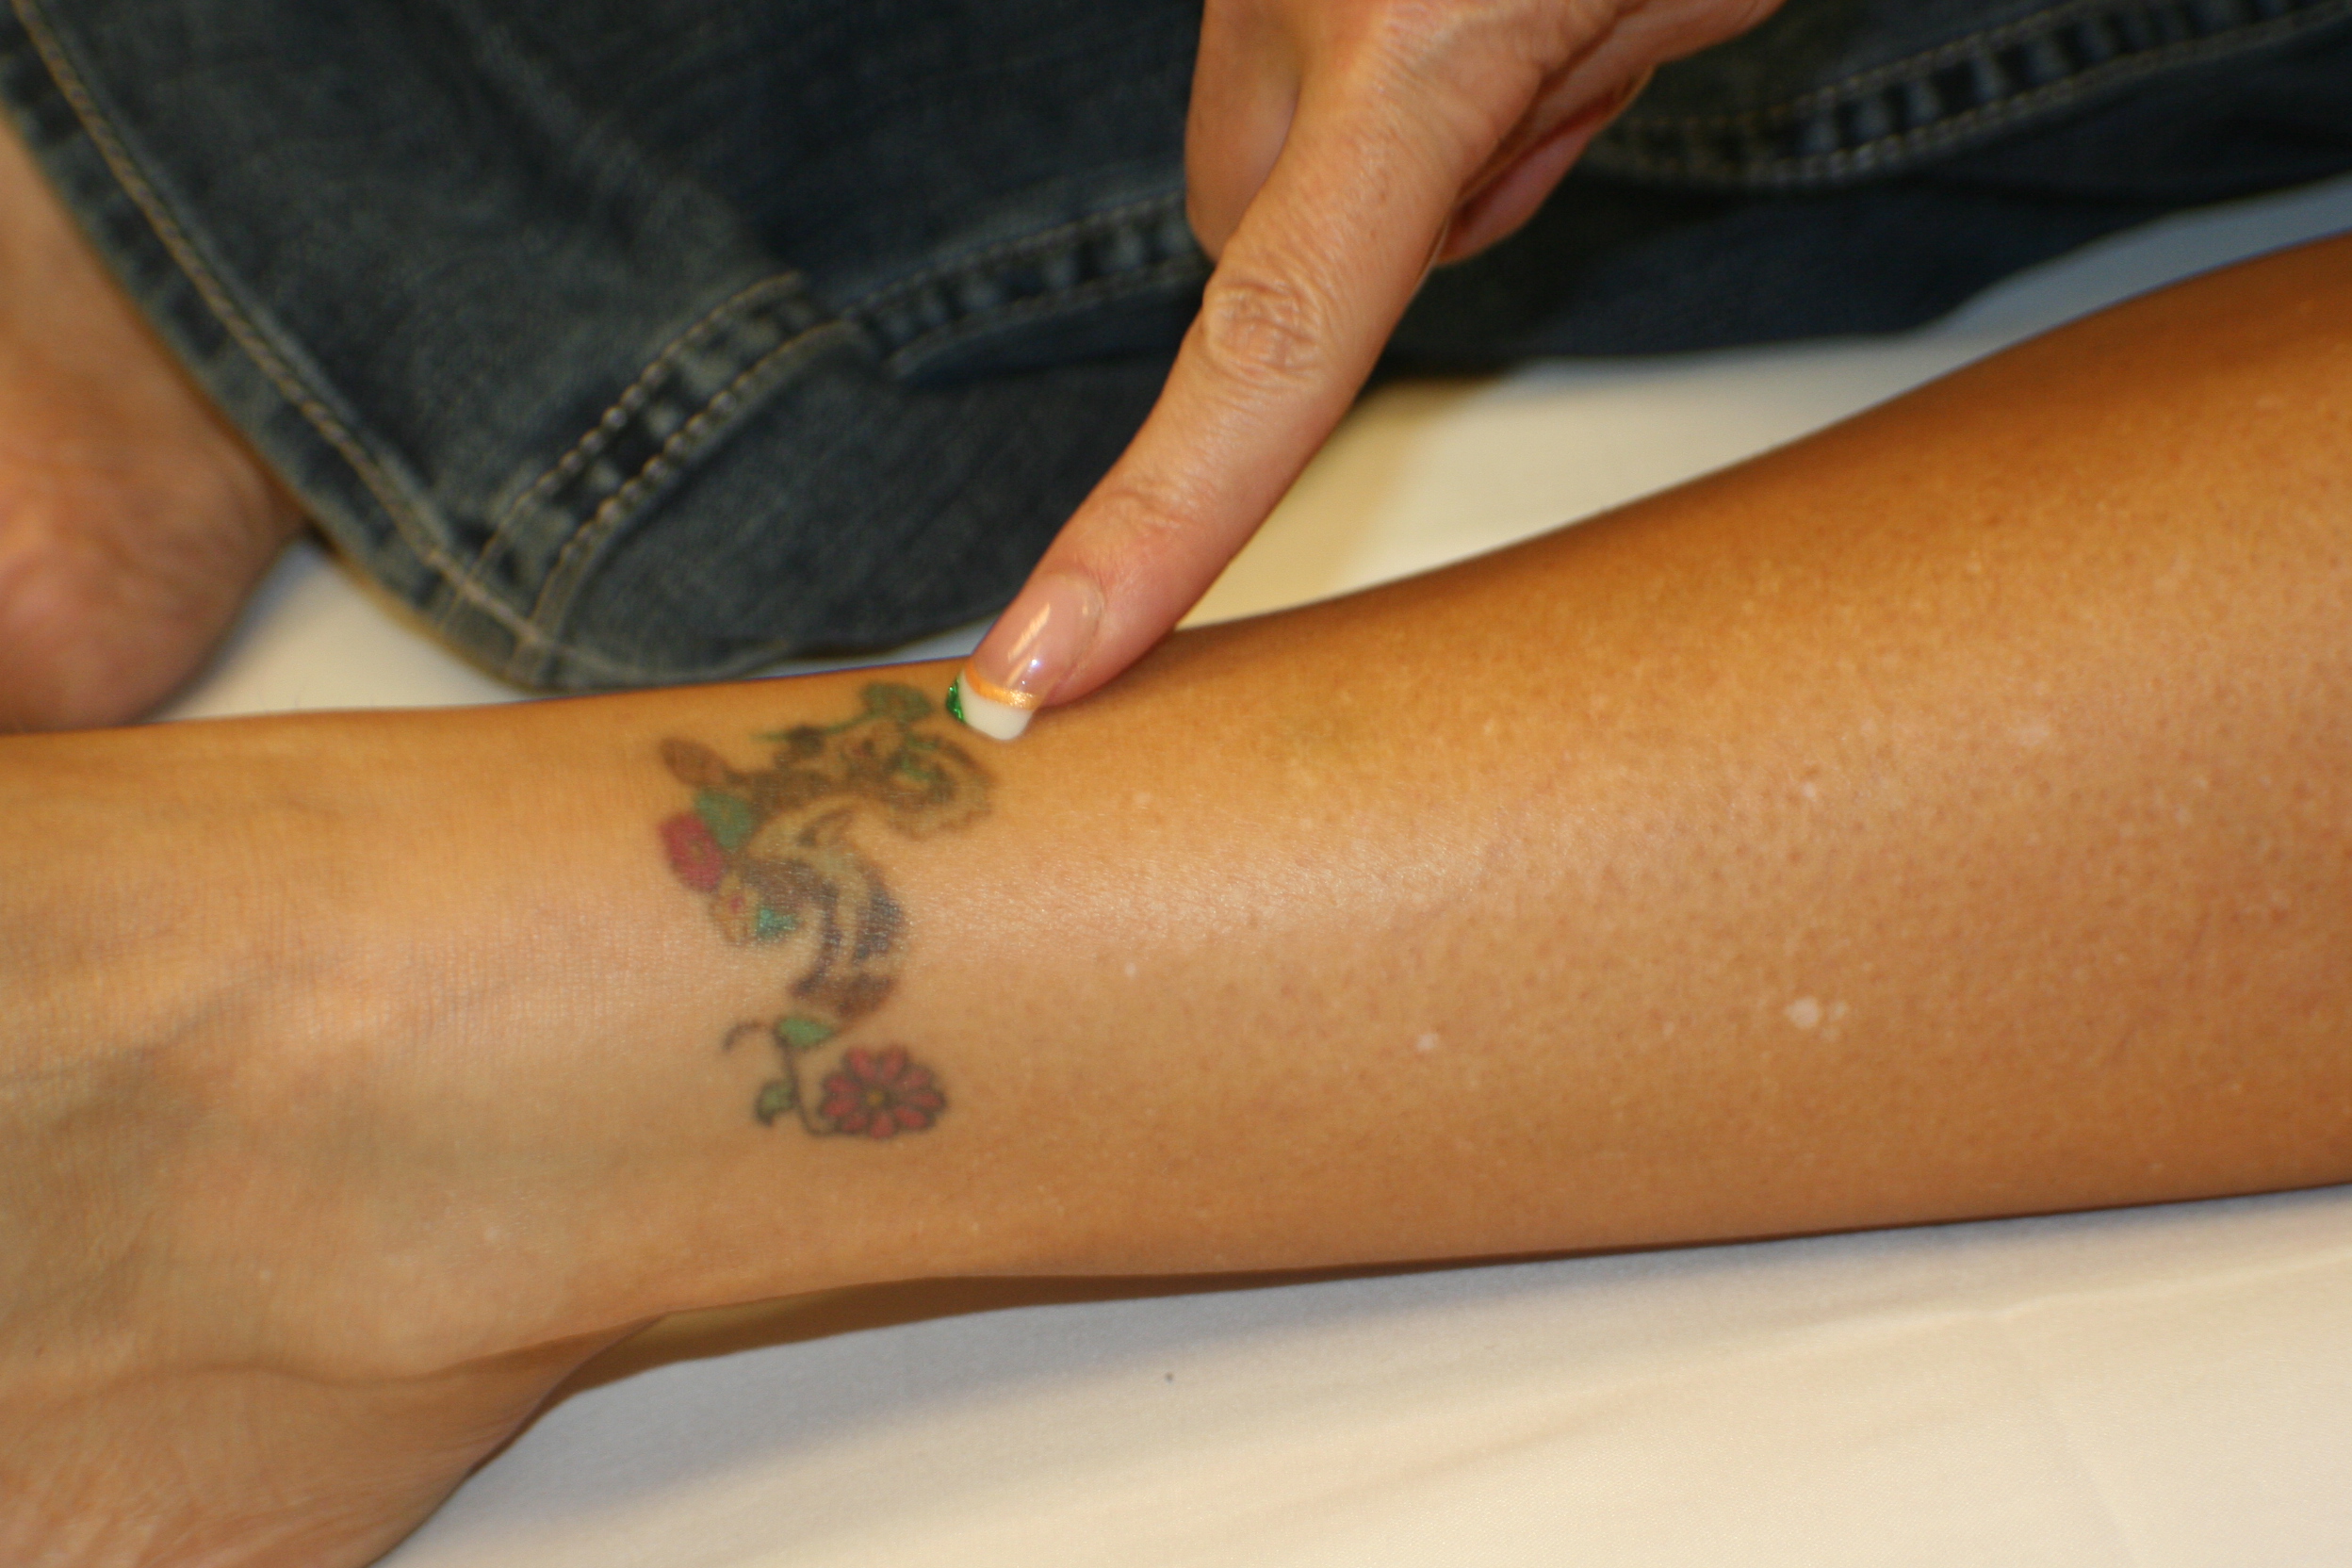 Bethany Cirlin - Tattoo Removal Specialist - Clean Canvas More Art |  LinkedIn